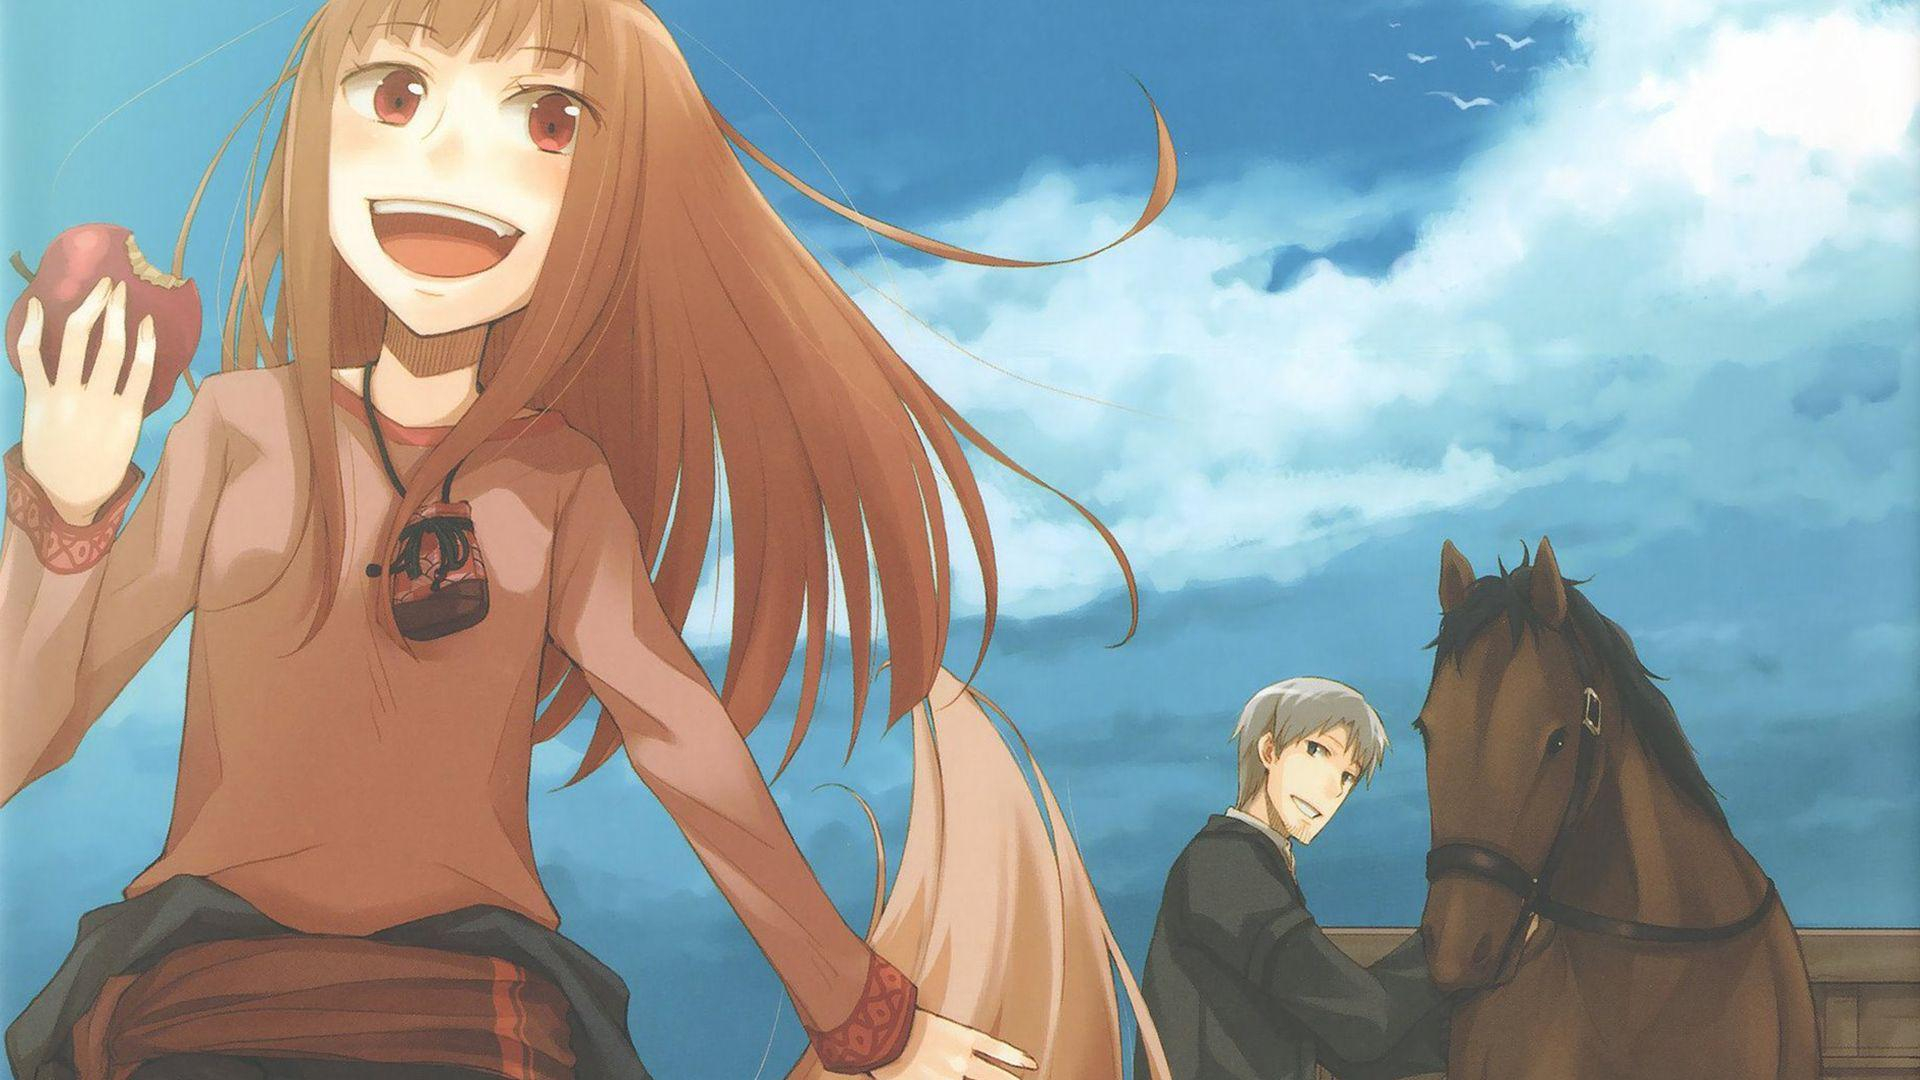 1920x1080 Spice and Wolf wallpaper | anime | Wallpaper Better